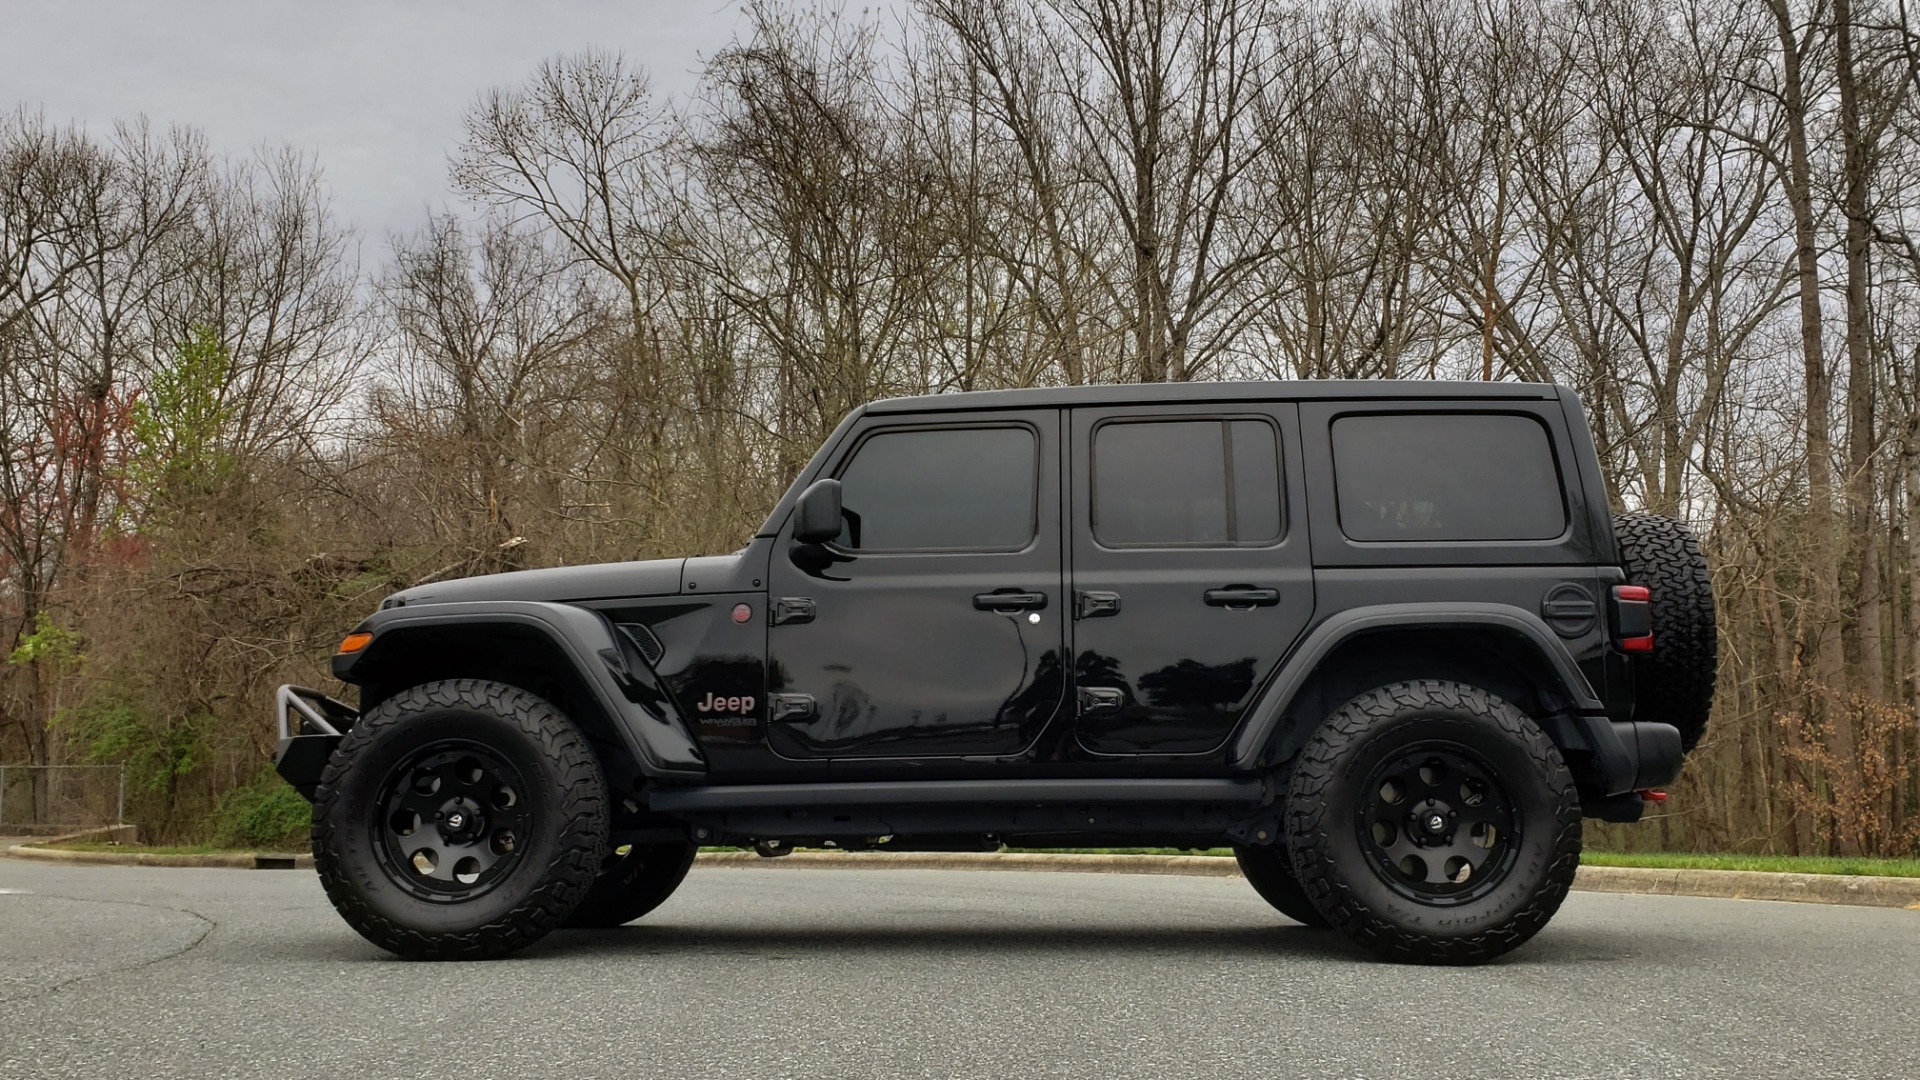 Used 2019 Jeep WRANGLER UNLIMITED RUBICON 4WD / V6 / 8-SPD AUTO / NAV / PWR TOP / REARVIEW for sale Sold at Formula Imports in Charlotte NC 28227 3